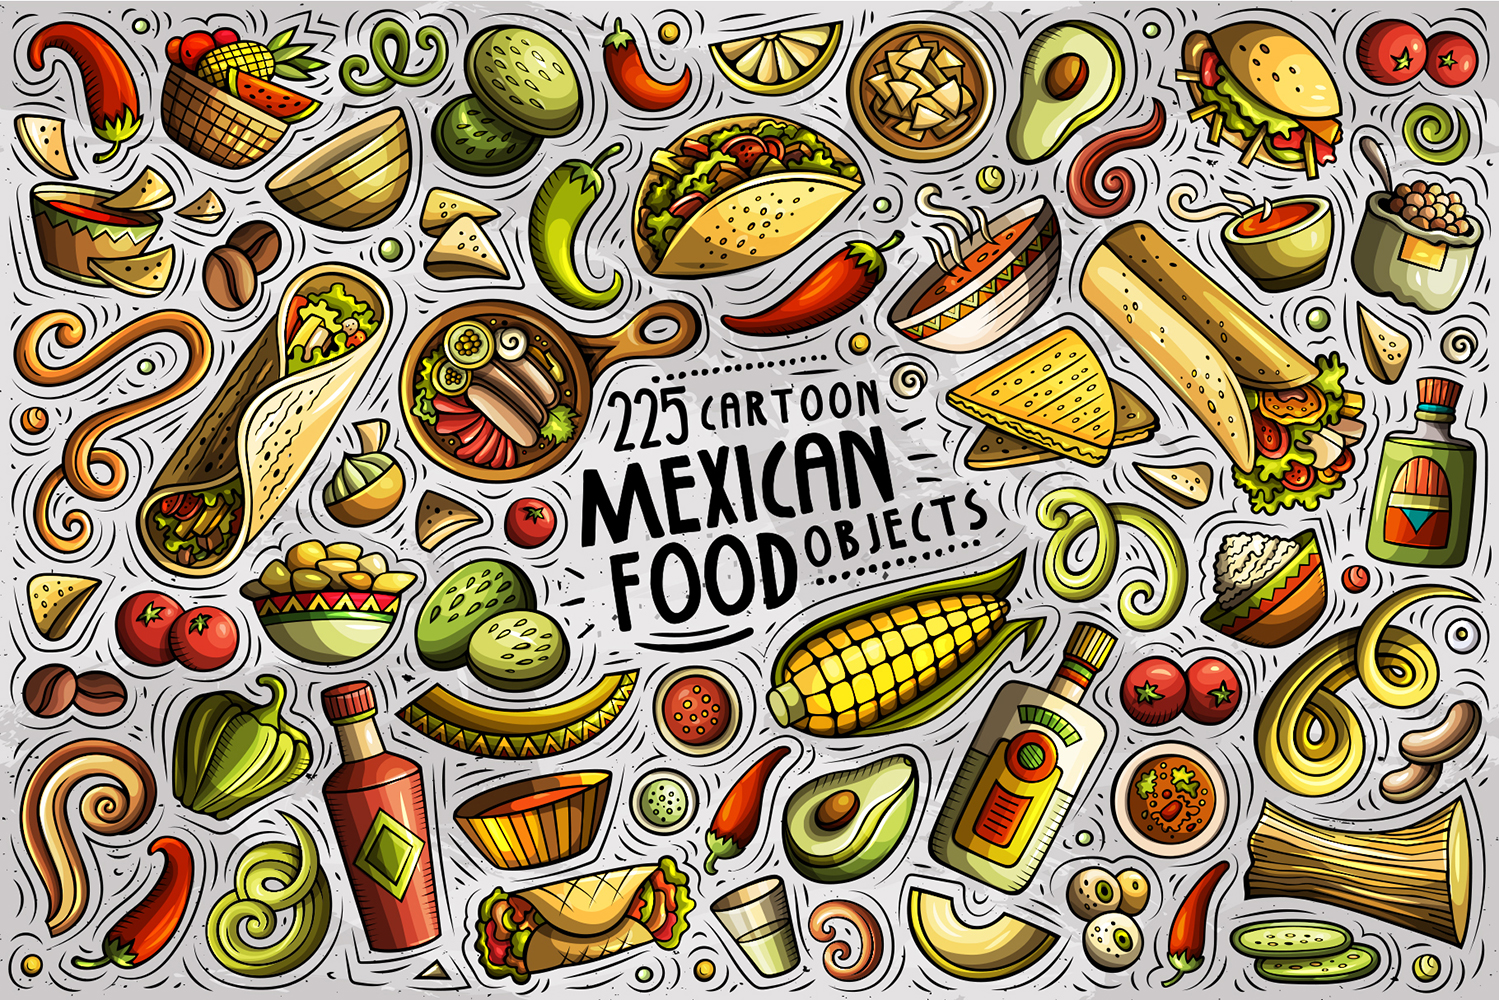 Mexican Food Cartoon Doodle Objects Set - Vector Image